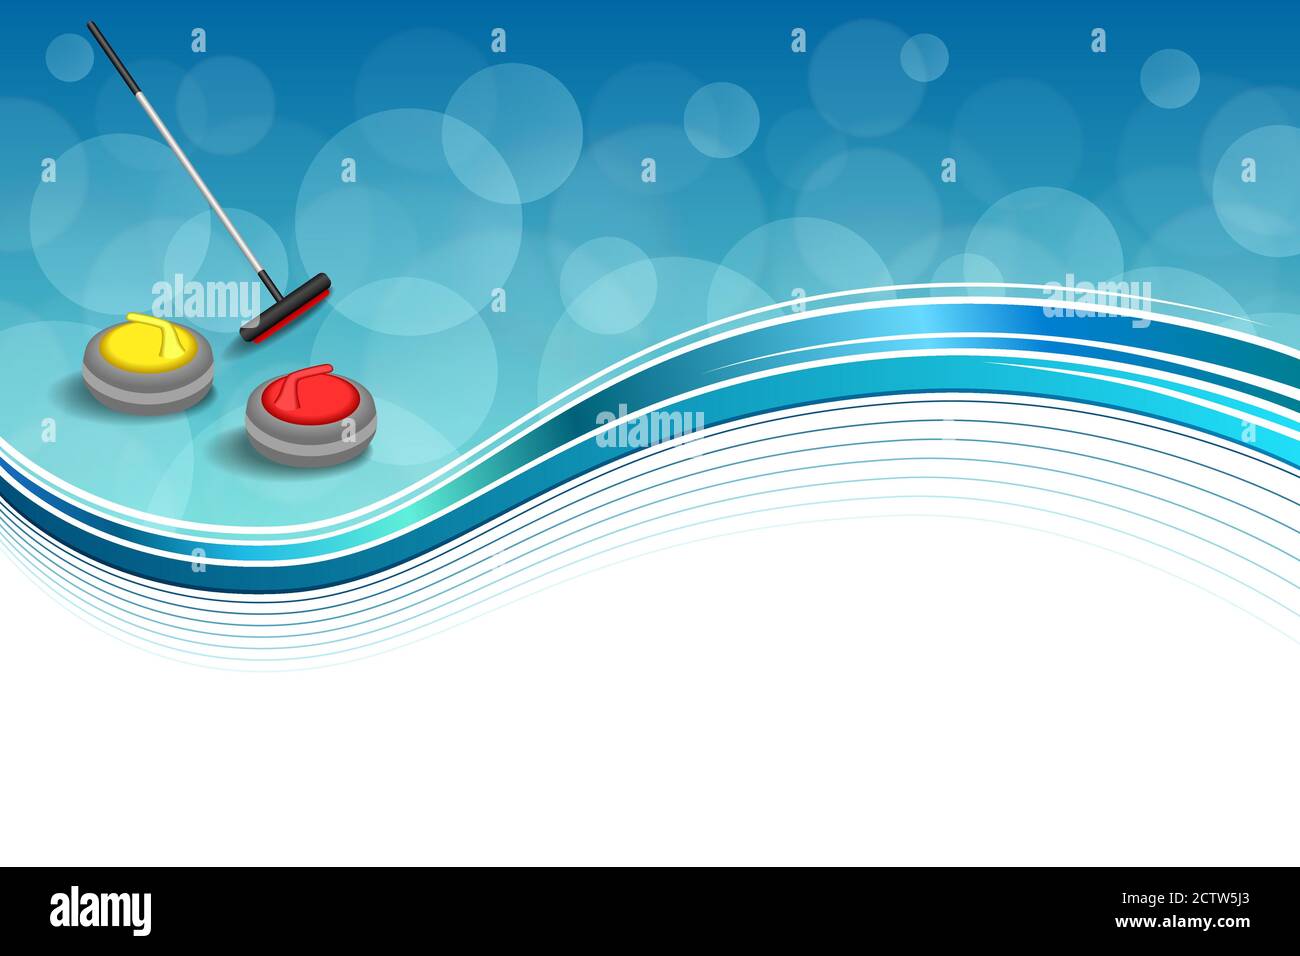 Background abstract curling sport blue ice red yellow stone broom frame illustration vector Stock Vector